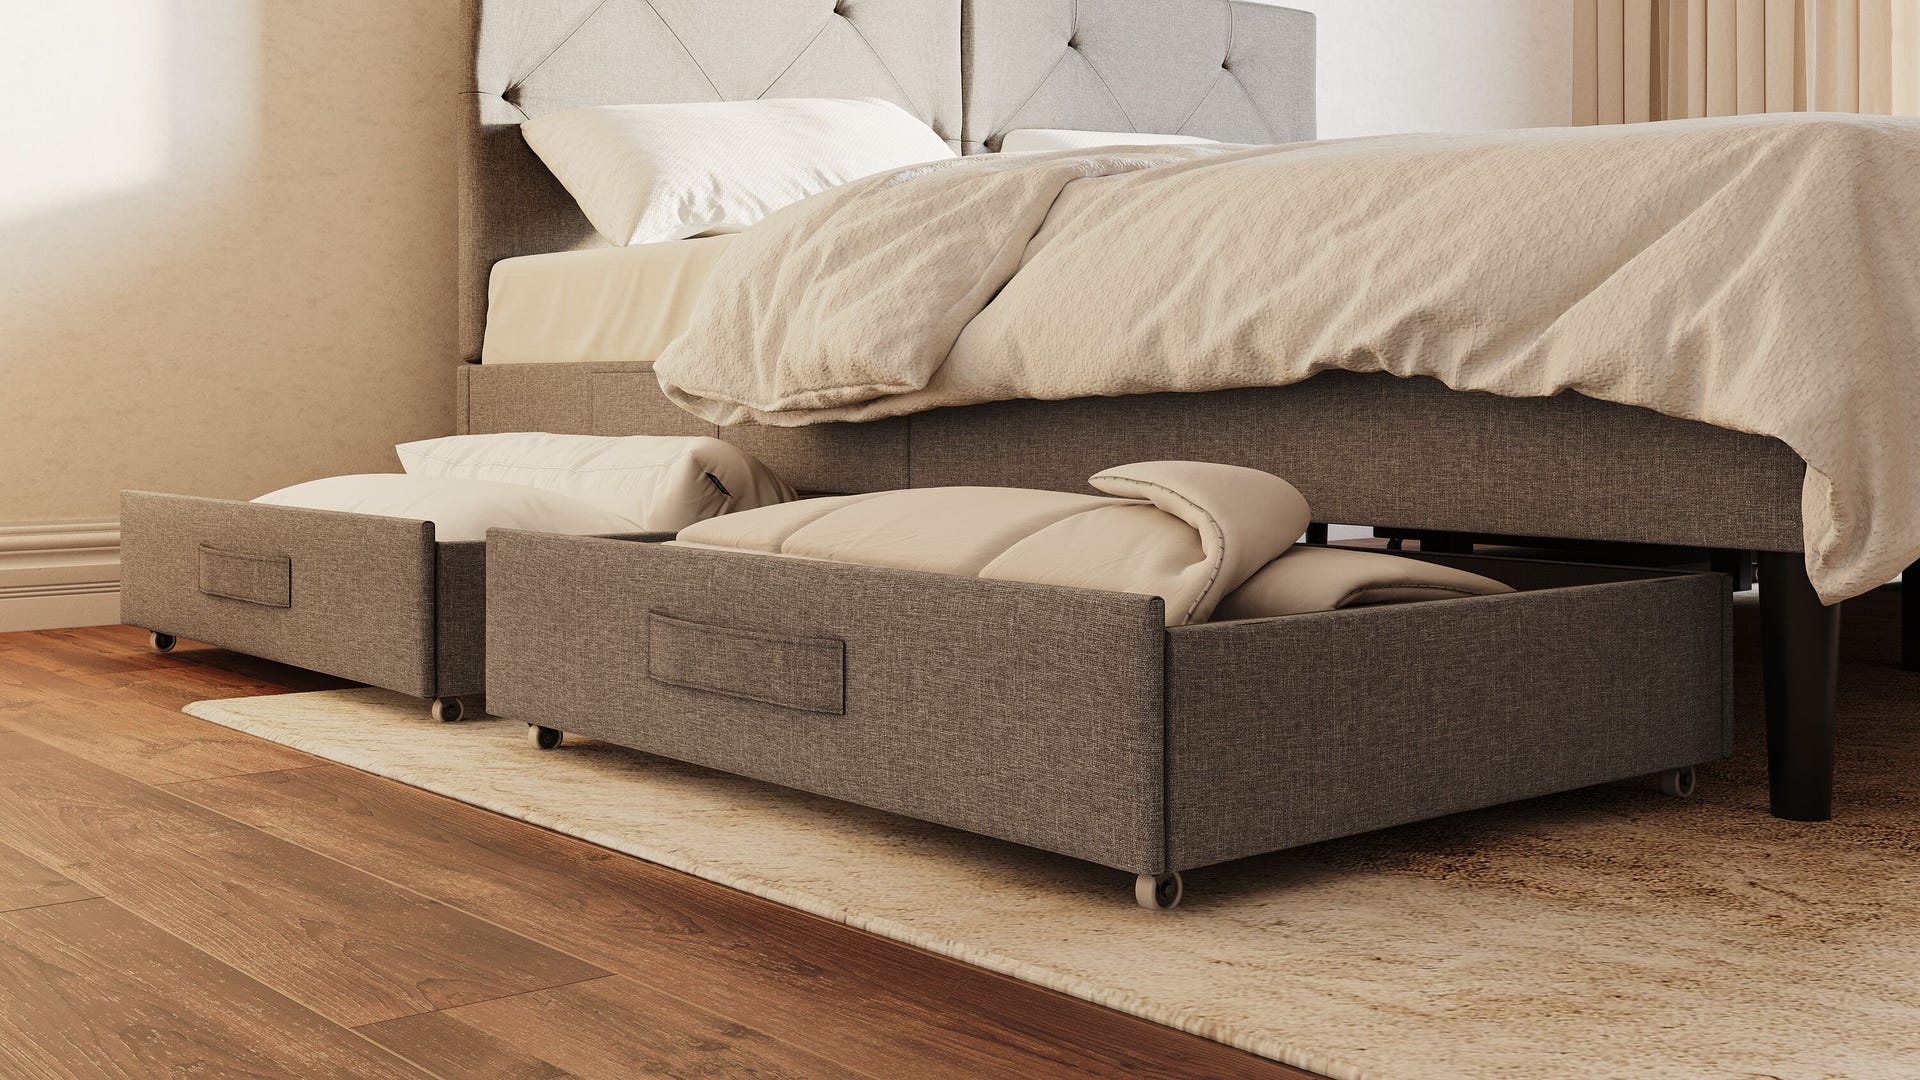 Large-New-Bed-Launch-BBV5_Lifestyle-Creation-1_view07.jpg